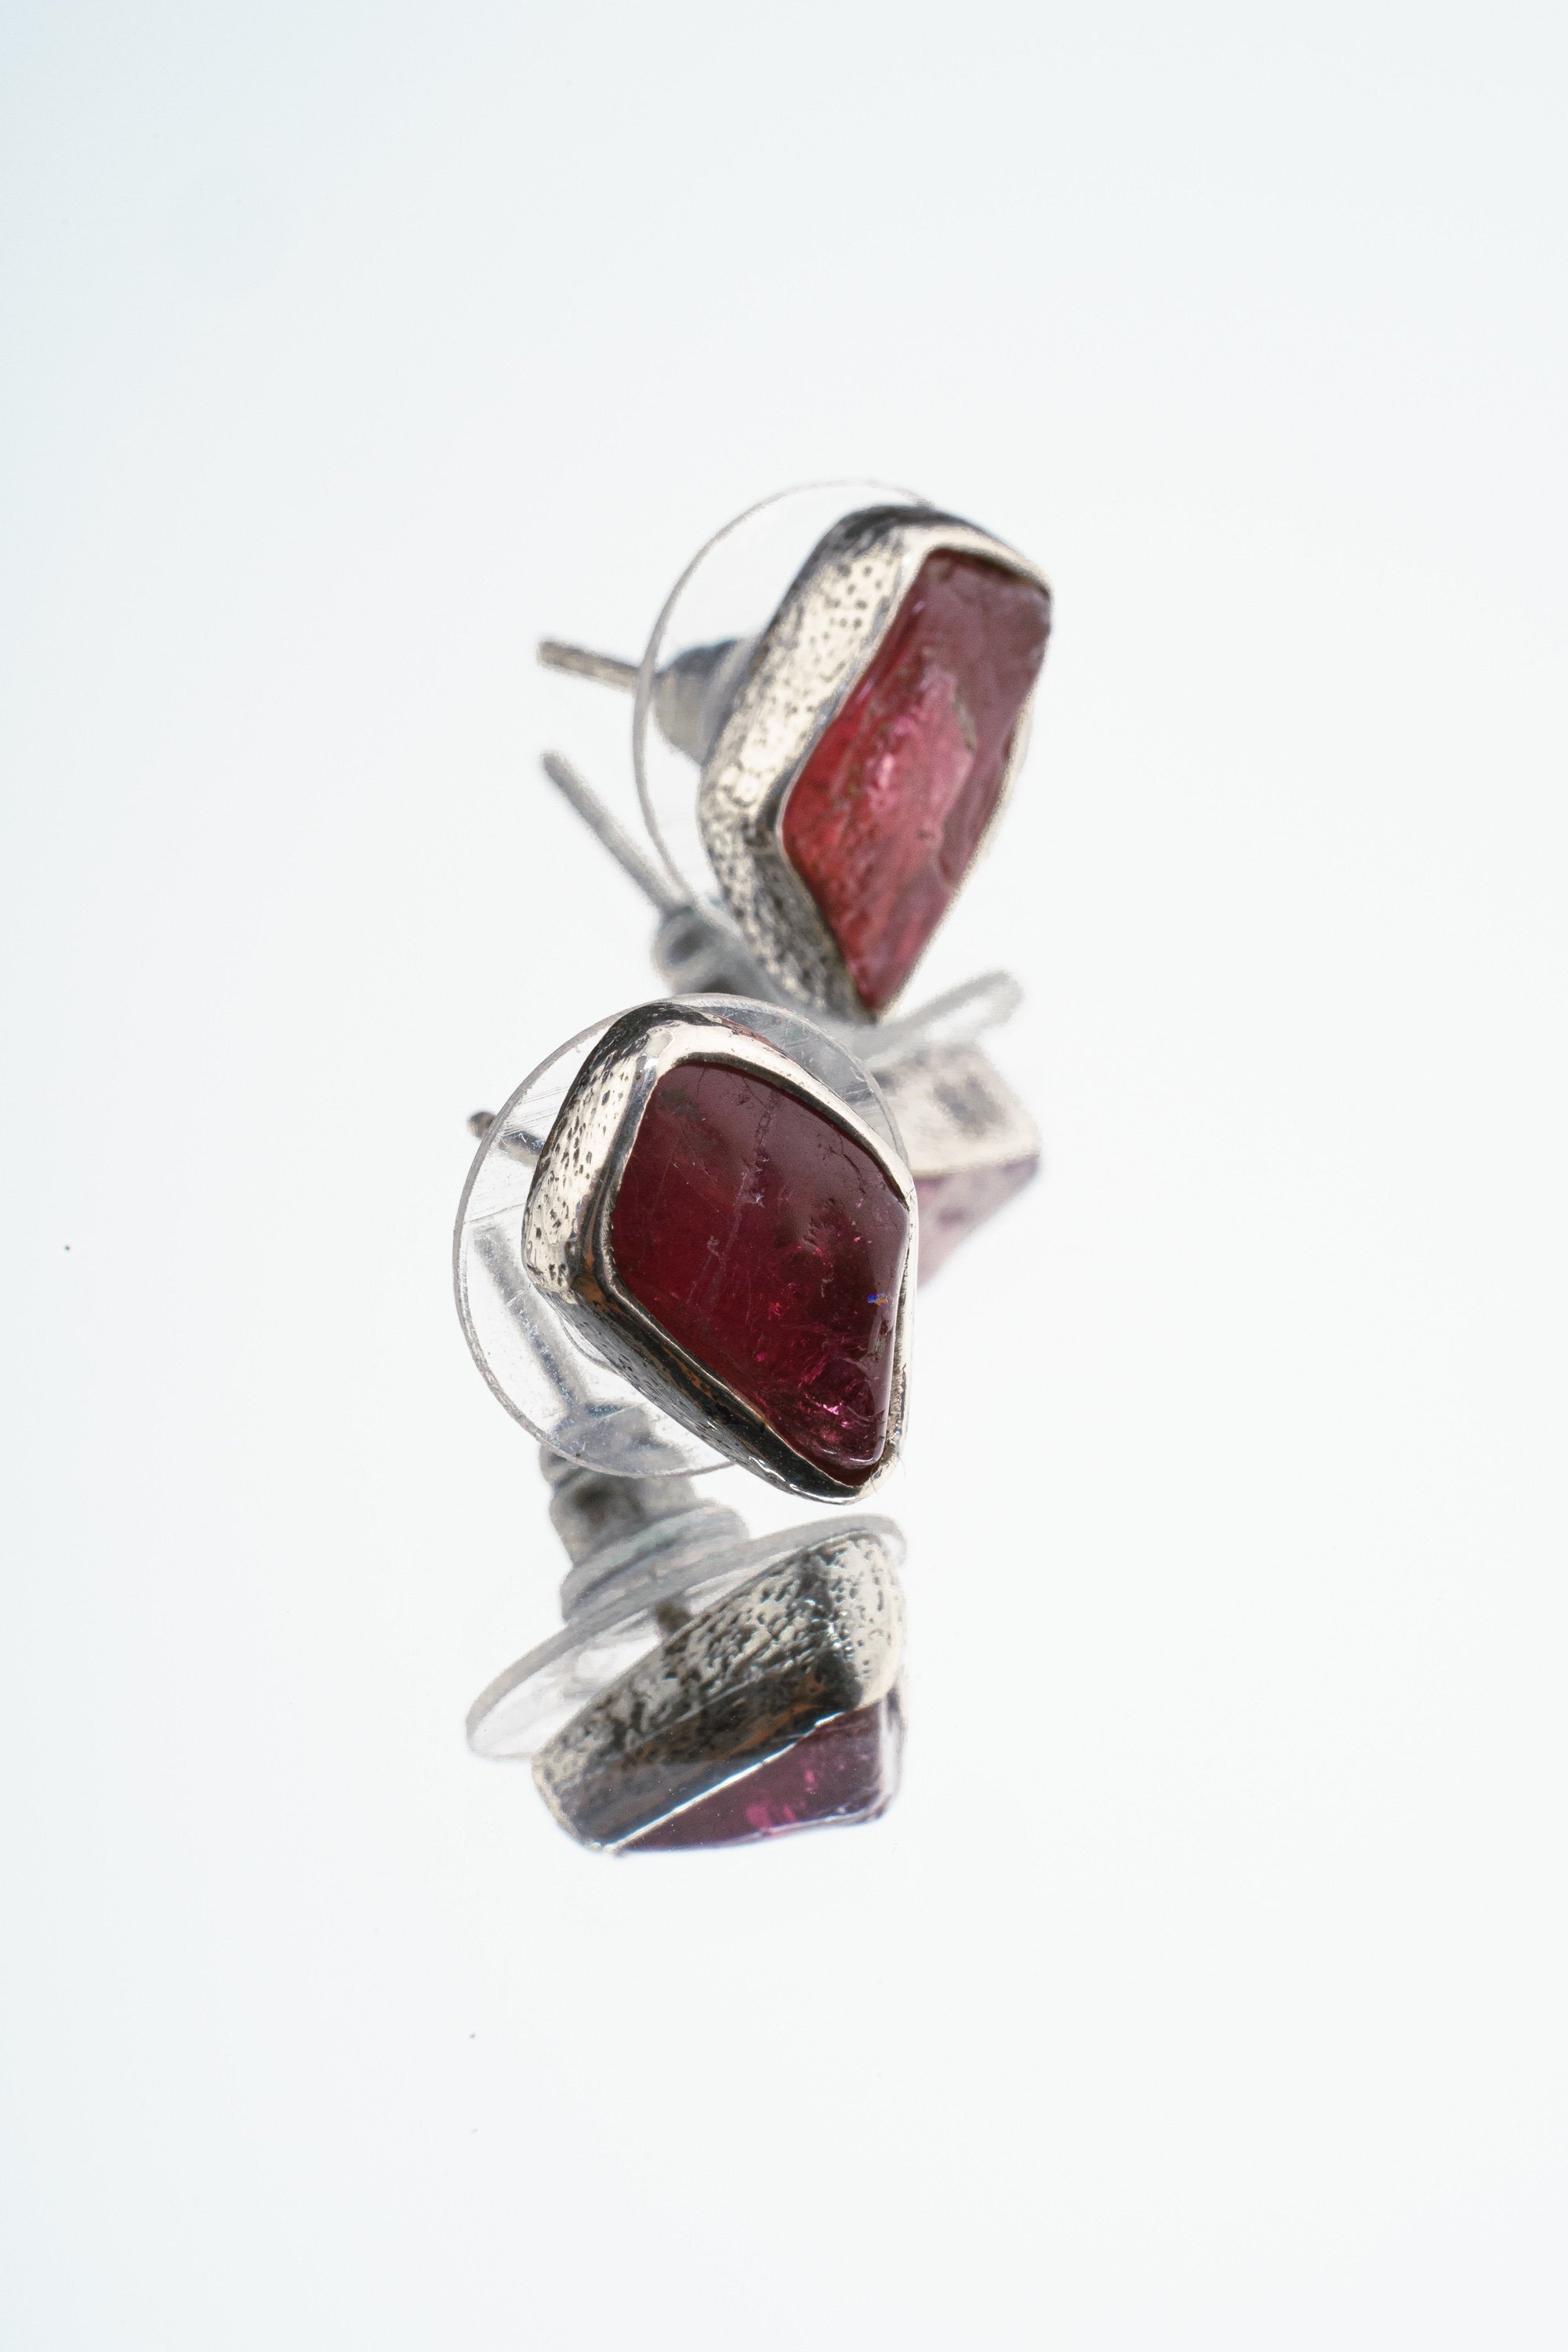 Rubellite Pink Tourmaline - Pick your organic shaped Pair - Sterling Silver - Polished Finish - Freeform Earring Studs